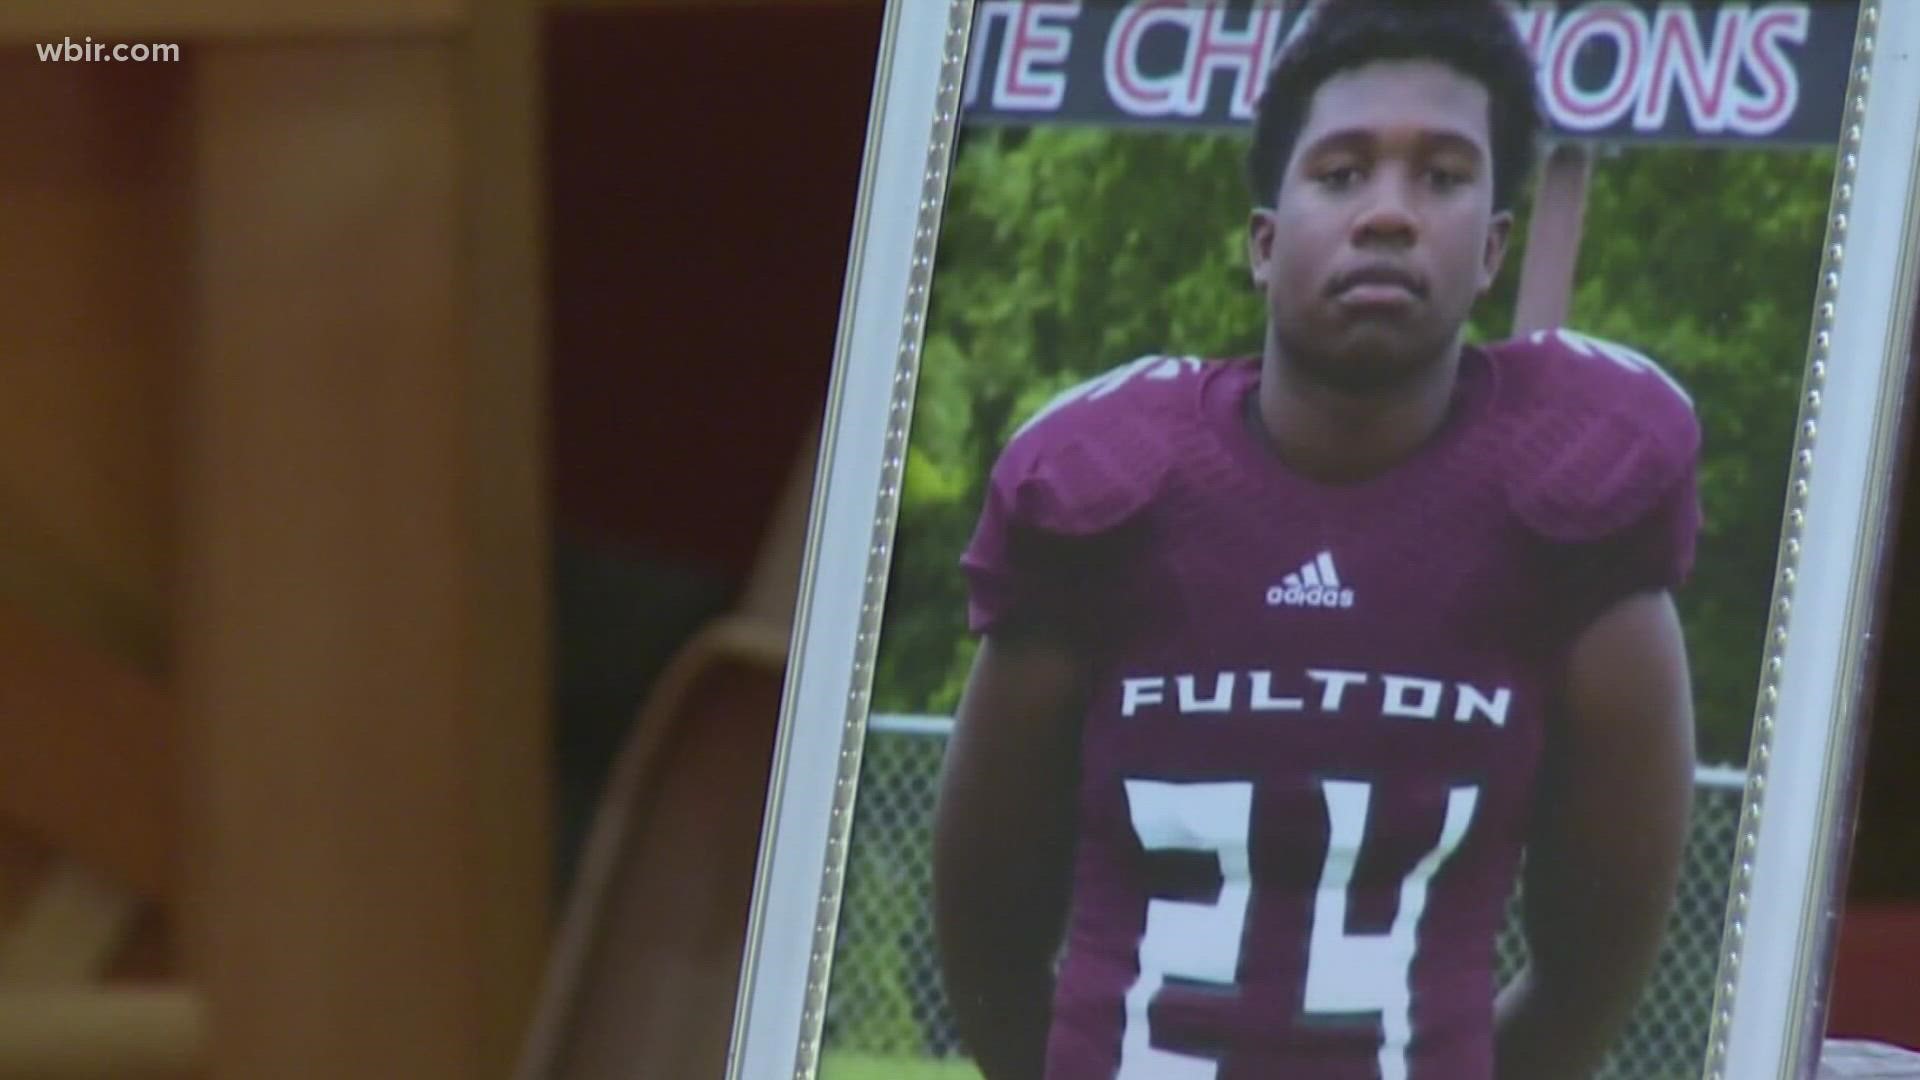 Todd Kelly Jr. changed his jersey from No. 6 to No. 24 in honor of Zaevion Dobson, who wore the number at Fulton High School before he was shot and killed.